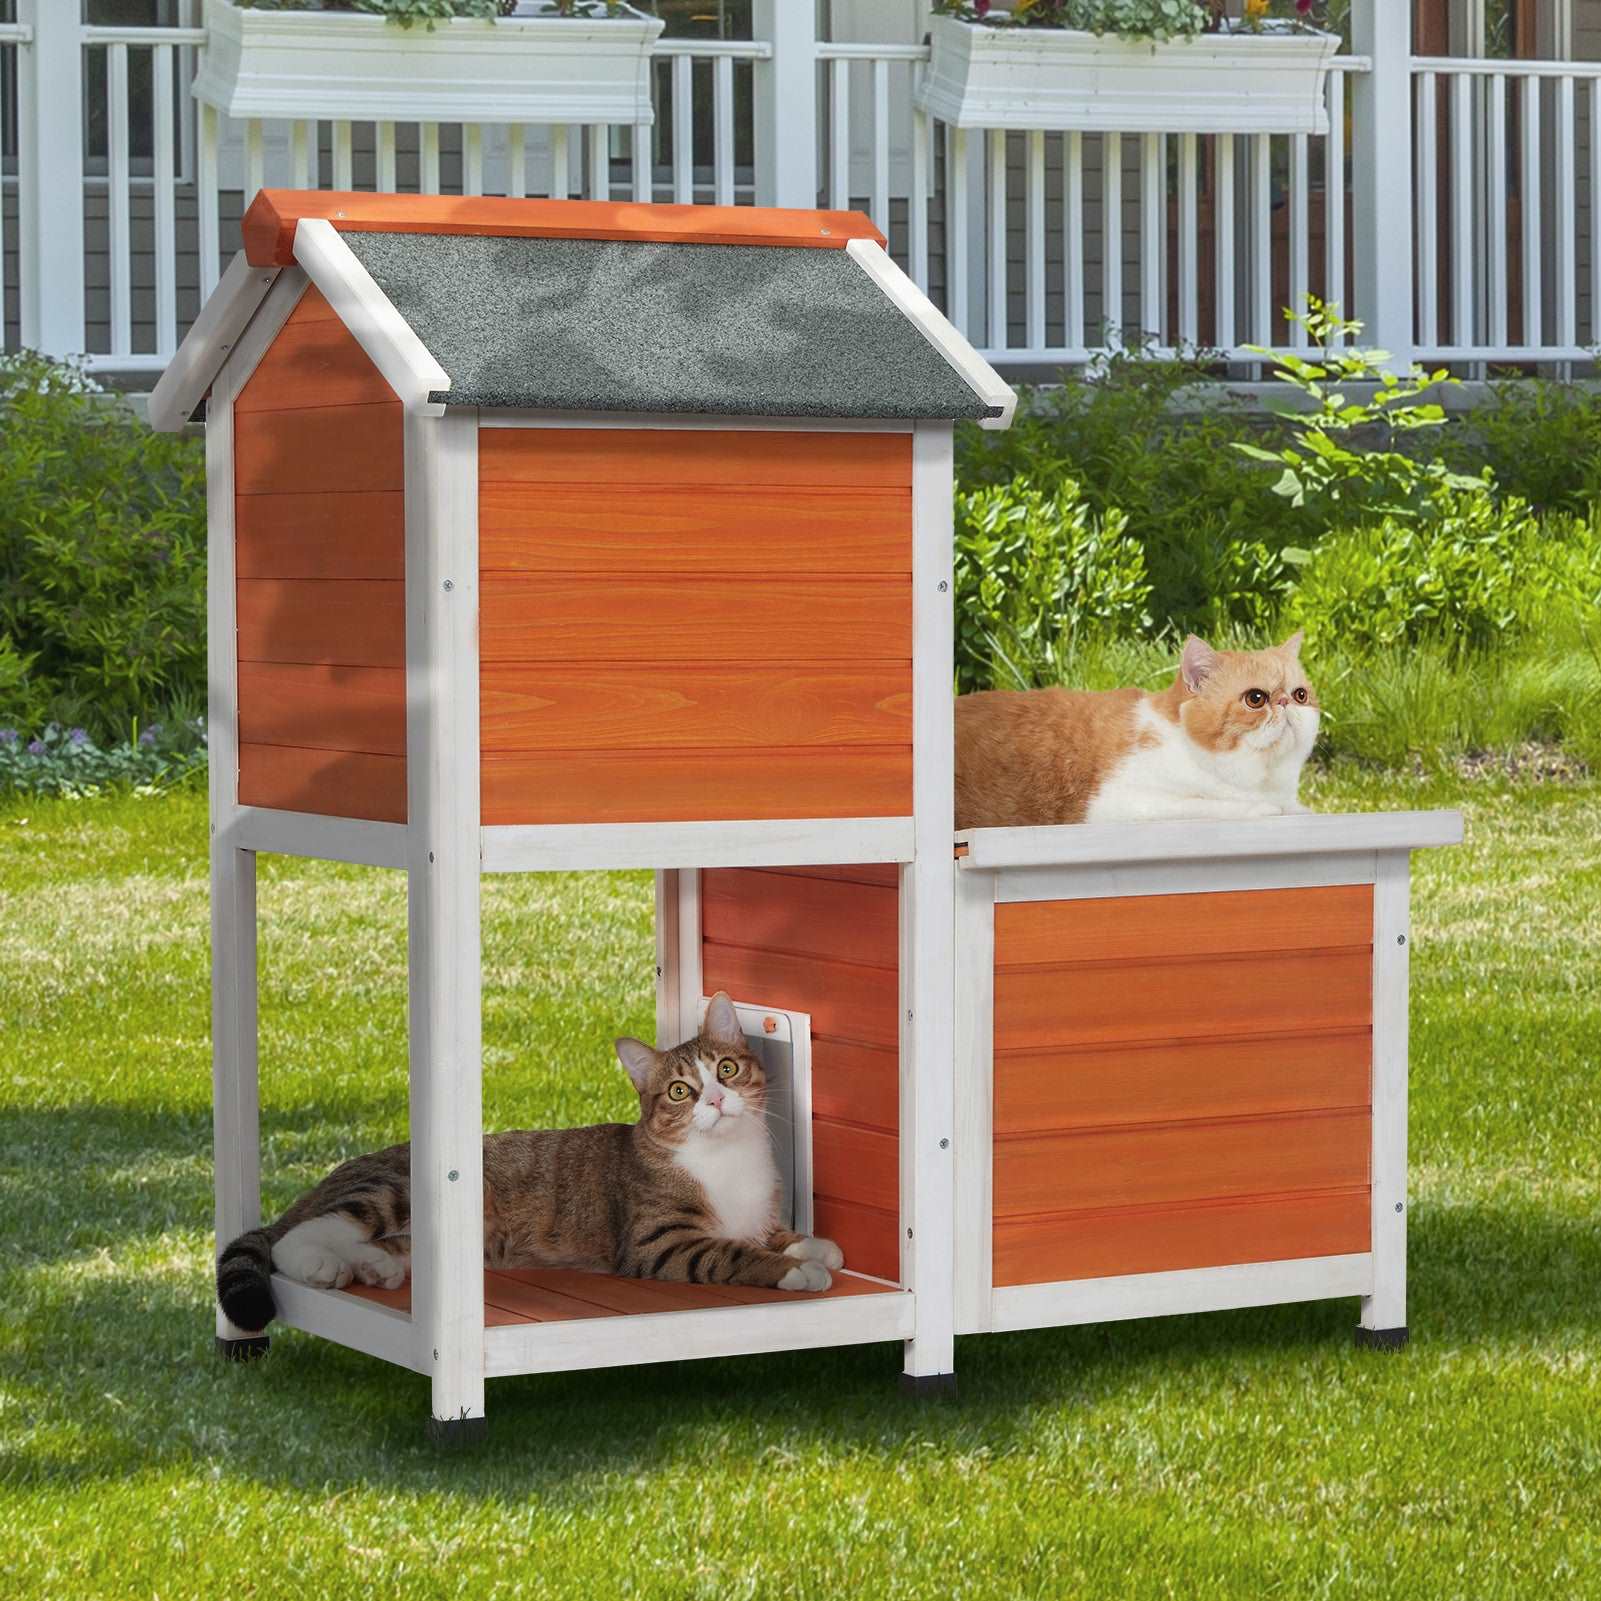 petsfit-2-stroy-cat-house-outdoor-insulated-high-feet-feeding-station-door-curtain-wood-outside-cat-house-bunny-rabbit-hutch-orange-01